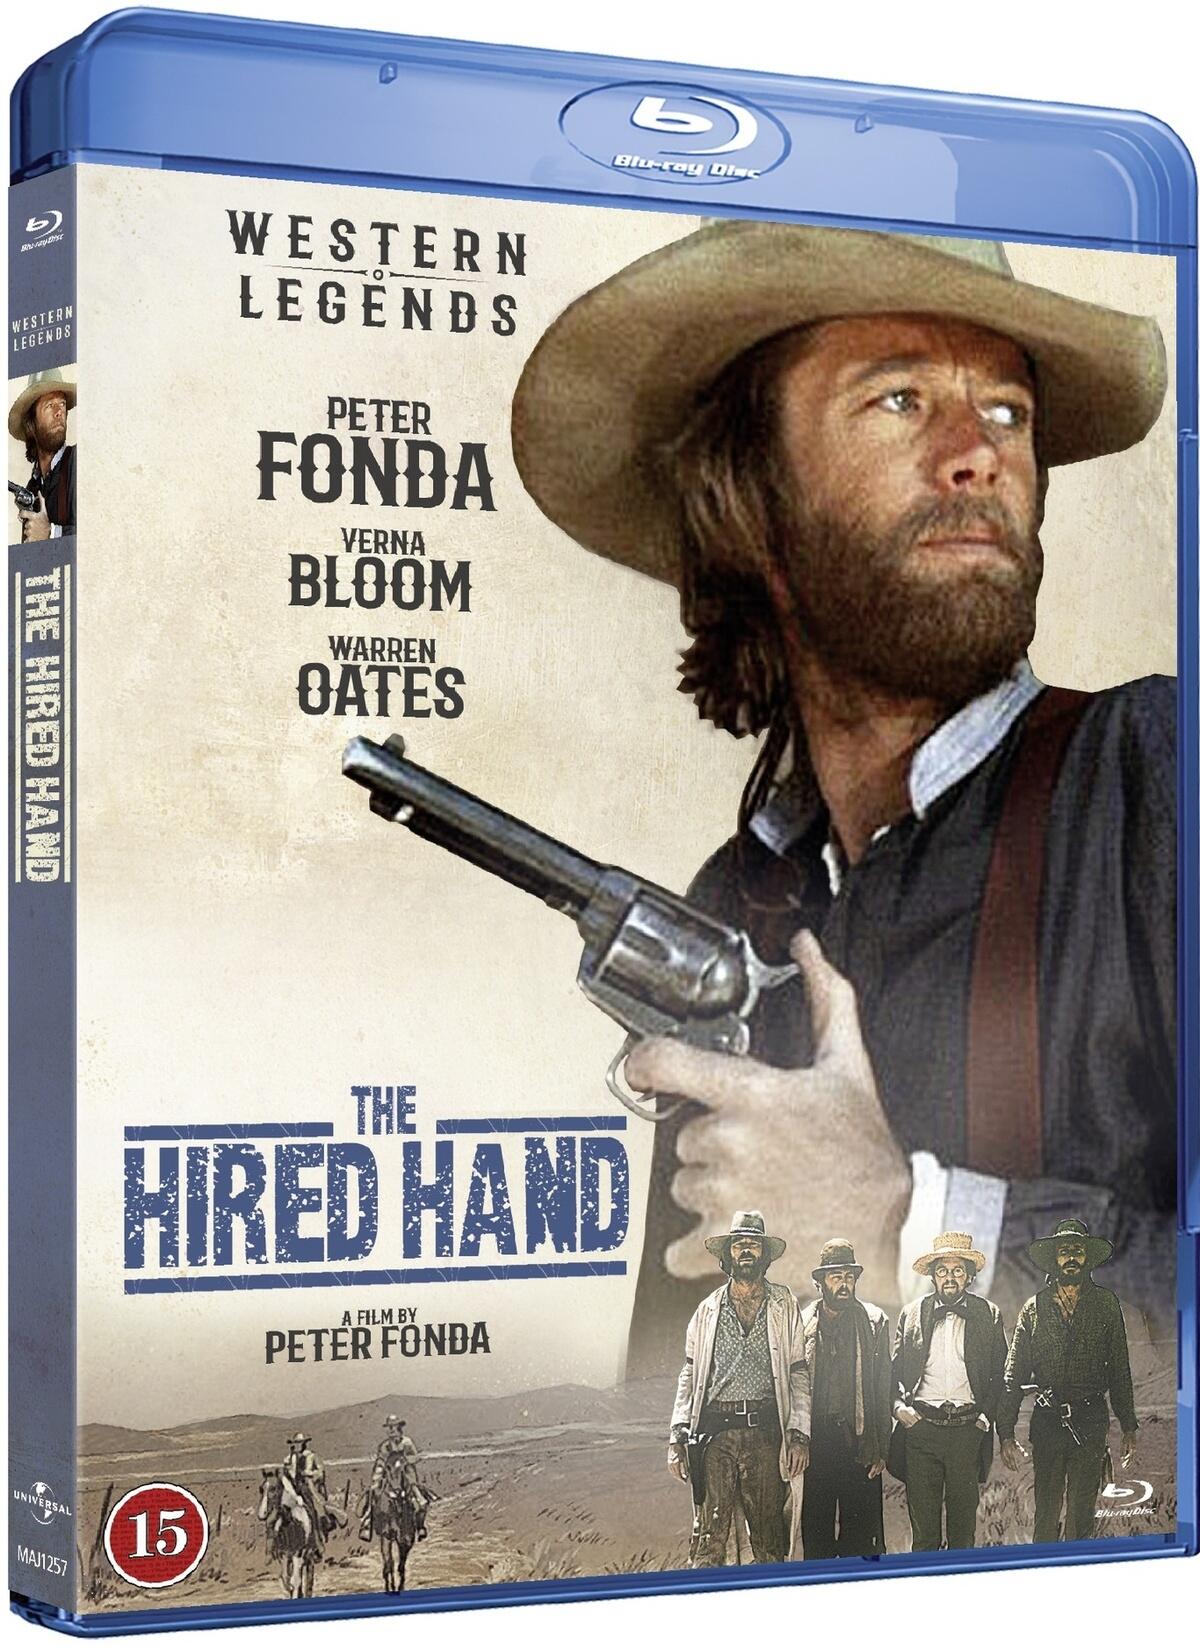 THE　BLURAY　HIRED　HAND